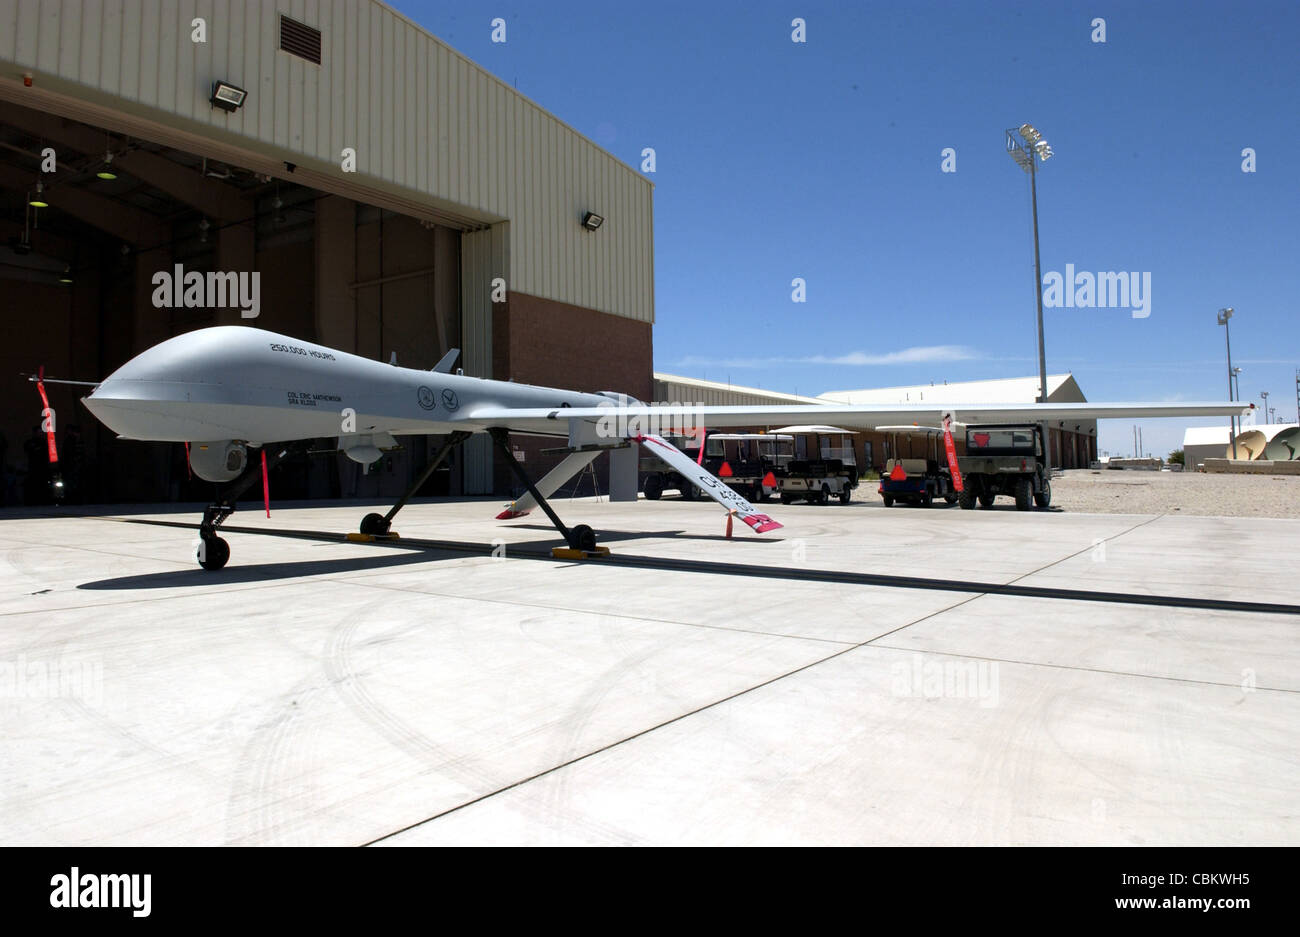 An MQ-1 Predator sits on display after commemorating the 250,000th flight hour June 22 at Creech Air Force Base, Nev. The Predator is assigned to the 11th Reconnaissance Squadron at Creech AFB. The MQ-1 Predator is a medium-altitude, long-endurance, remotely piloted aircraft. Its primary mission is interdiction and conducting armed reconnaissance against critical, perishable targets. Stock Photo